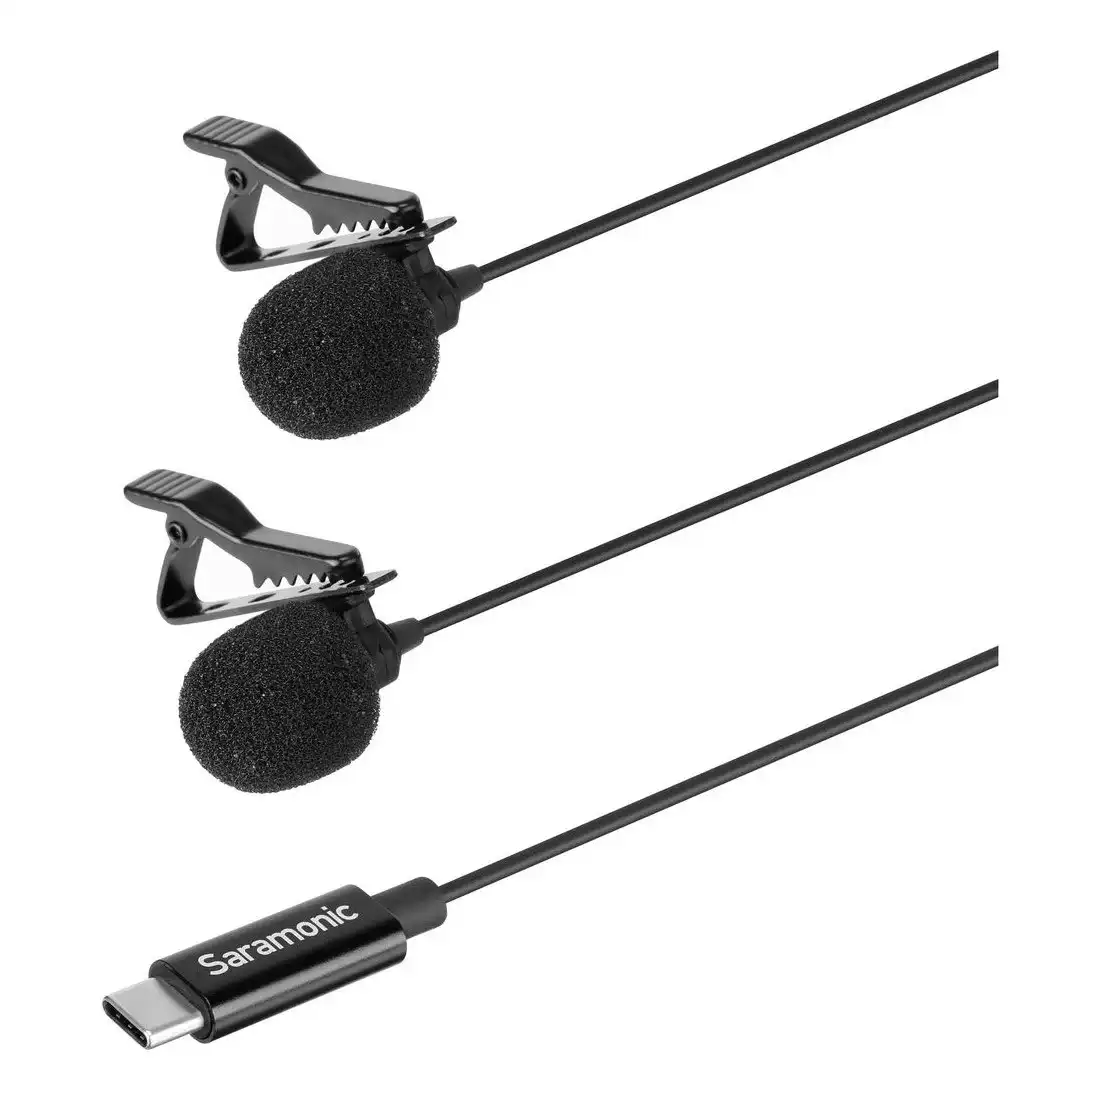 Saramonic LavMicro U3C Dual Omnidirectional Lavalier Microphones with USB Type-C Connector for Android Devices